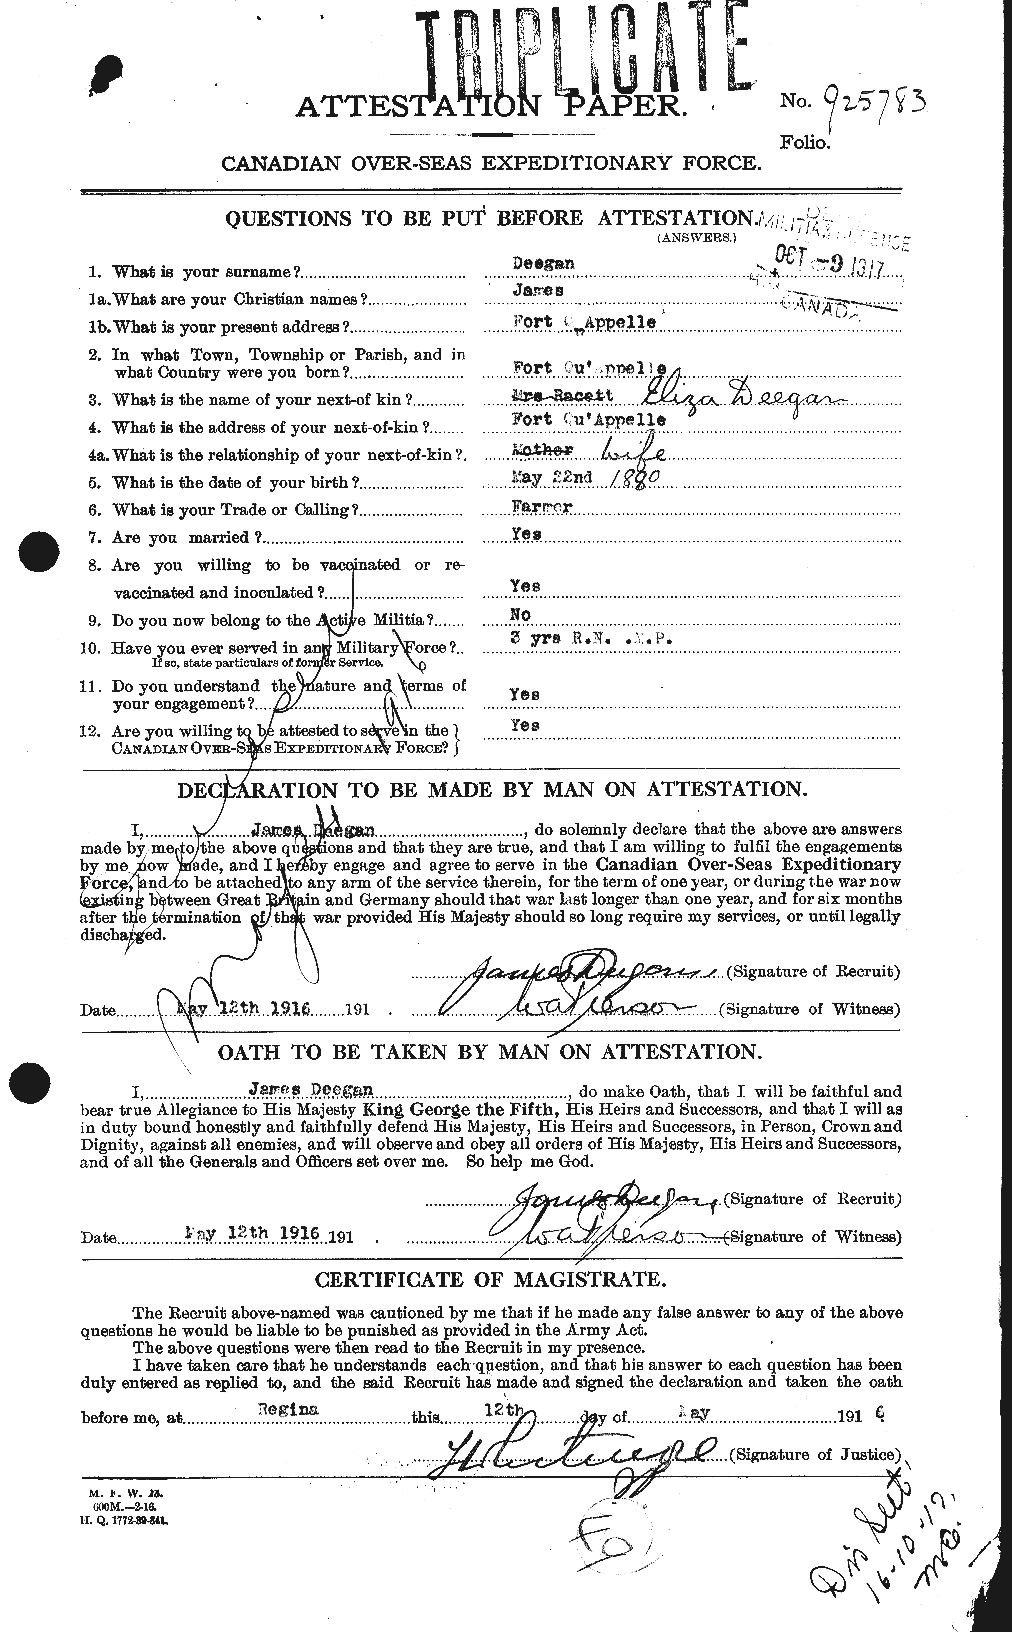 Personnel Records of the First World War - CEF 285736a